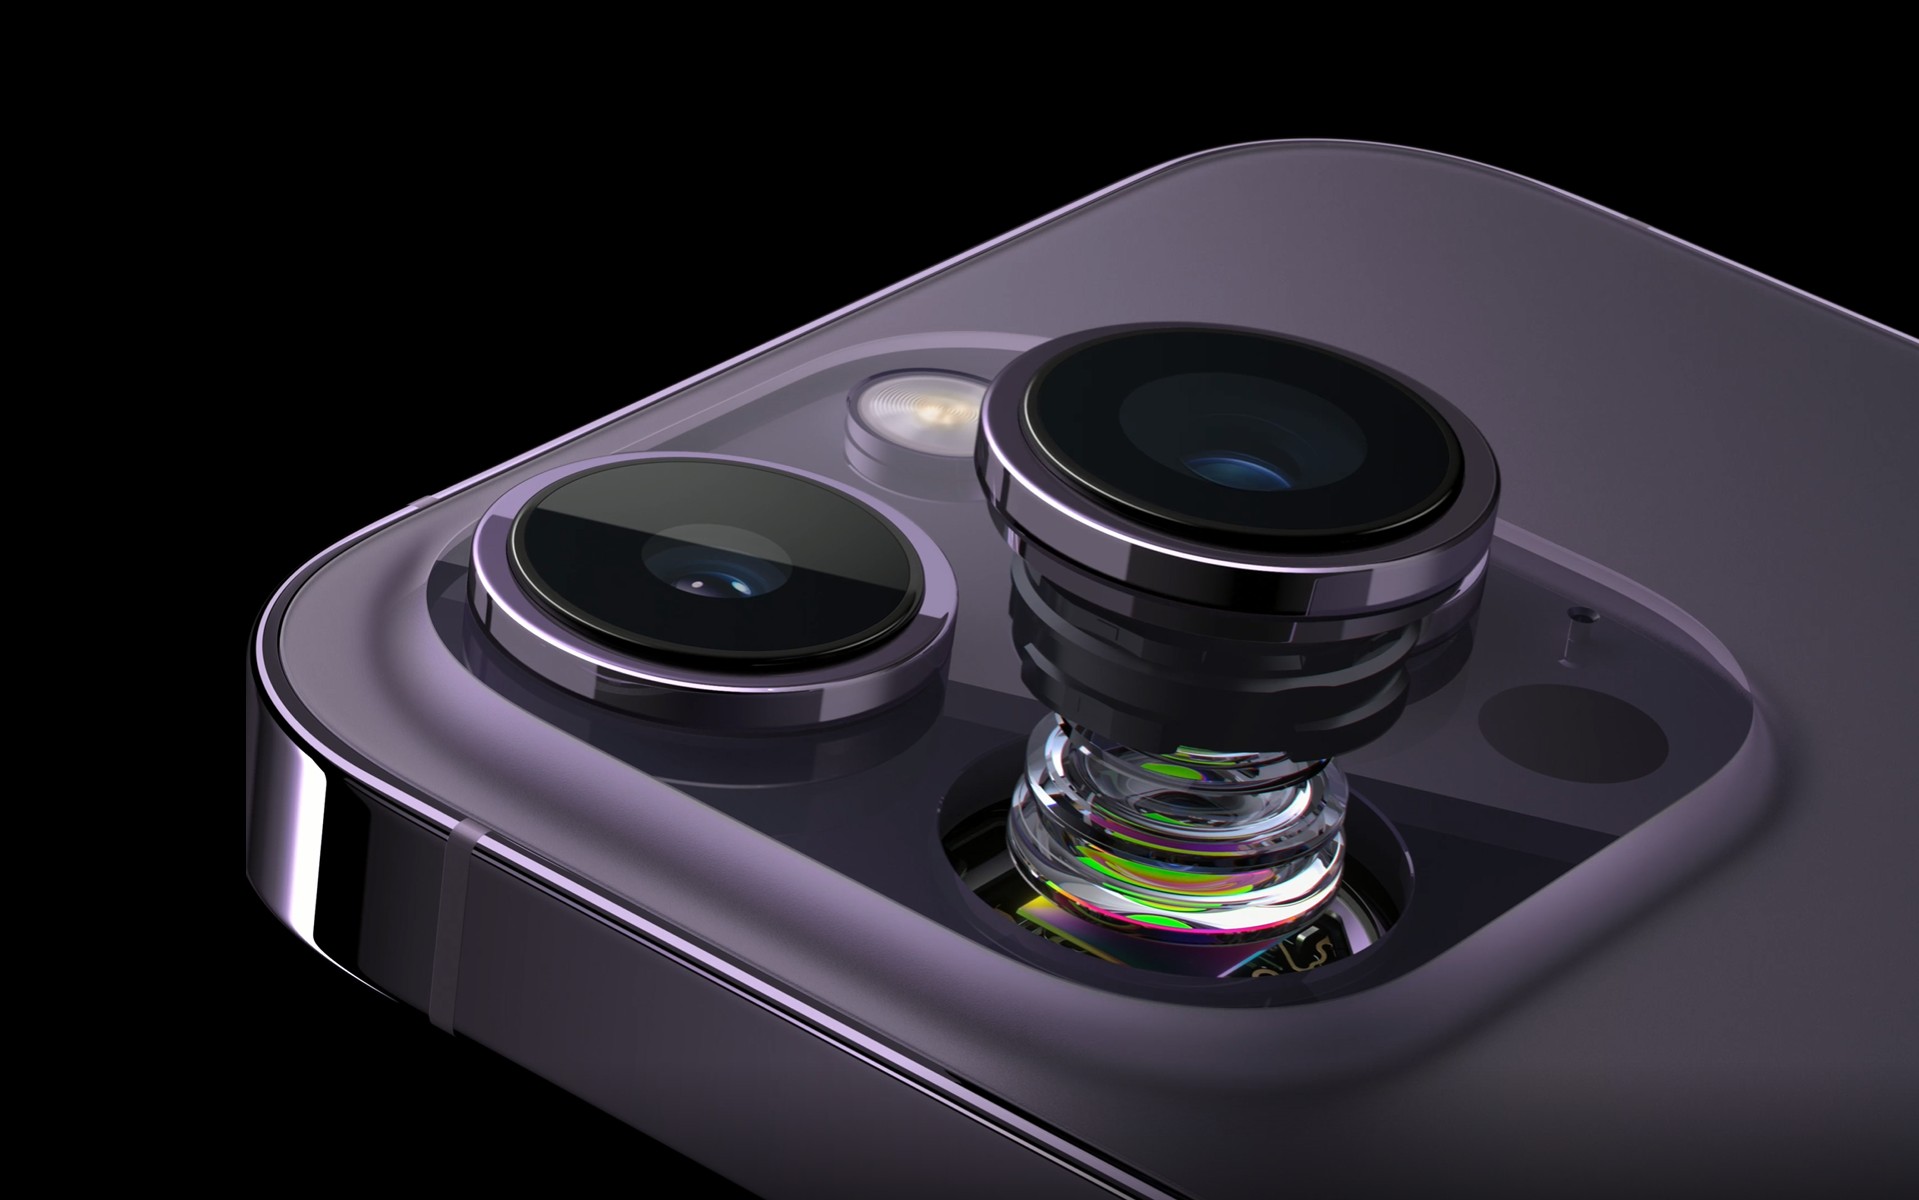 Apple confirms it uses Sony camera sensors for its iPhones